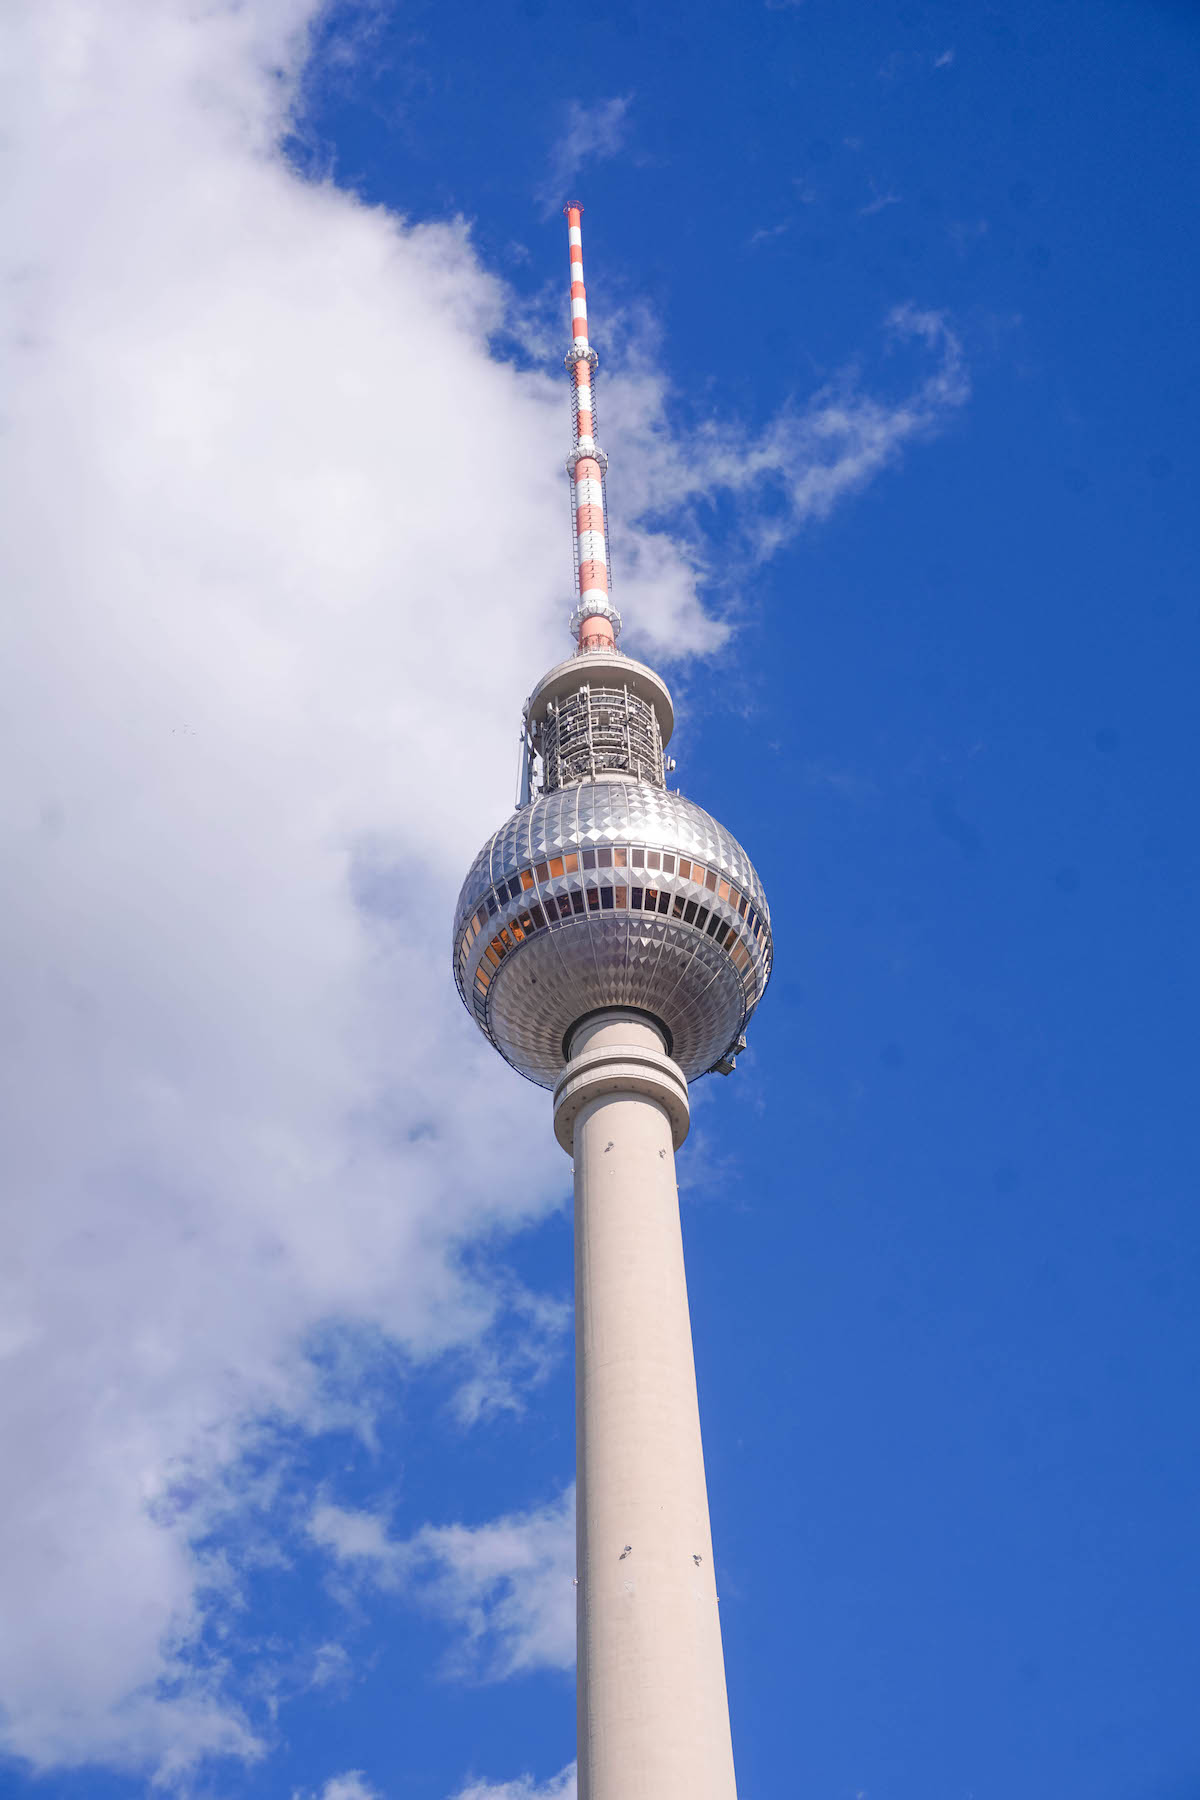 A close-up view of the ball at the top of Berlin's TV tower 